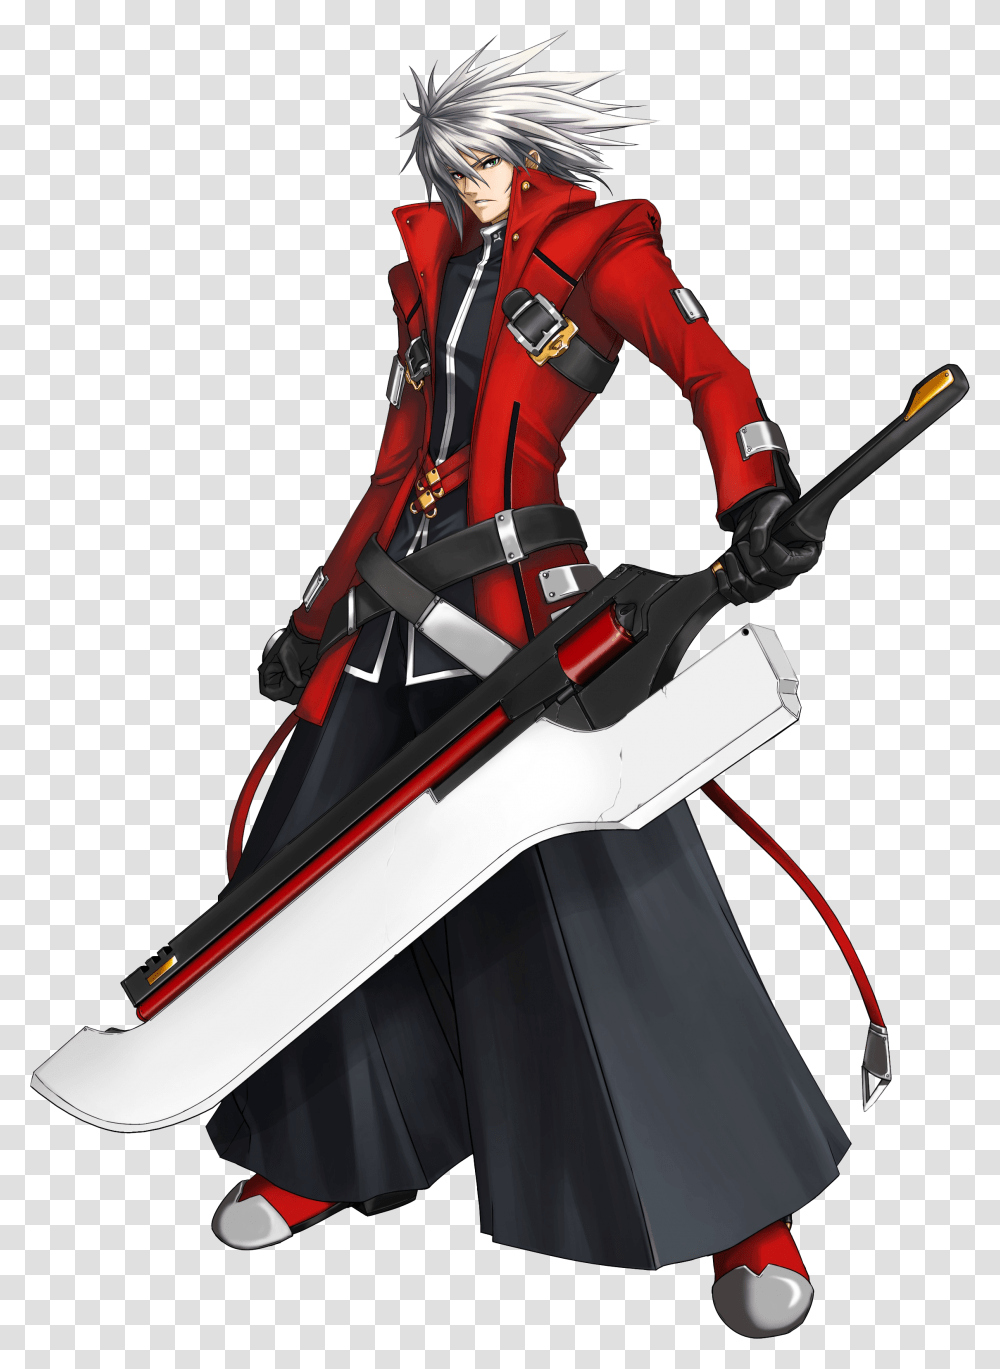 Concept Art Of Ragna The Bloodedge From Blazblue Ragna The Bloodedge Sword, Person, Human, Samurai, Ninja Transparent Png